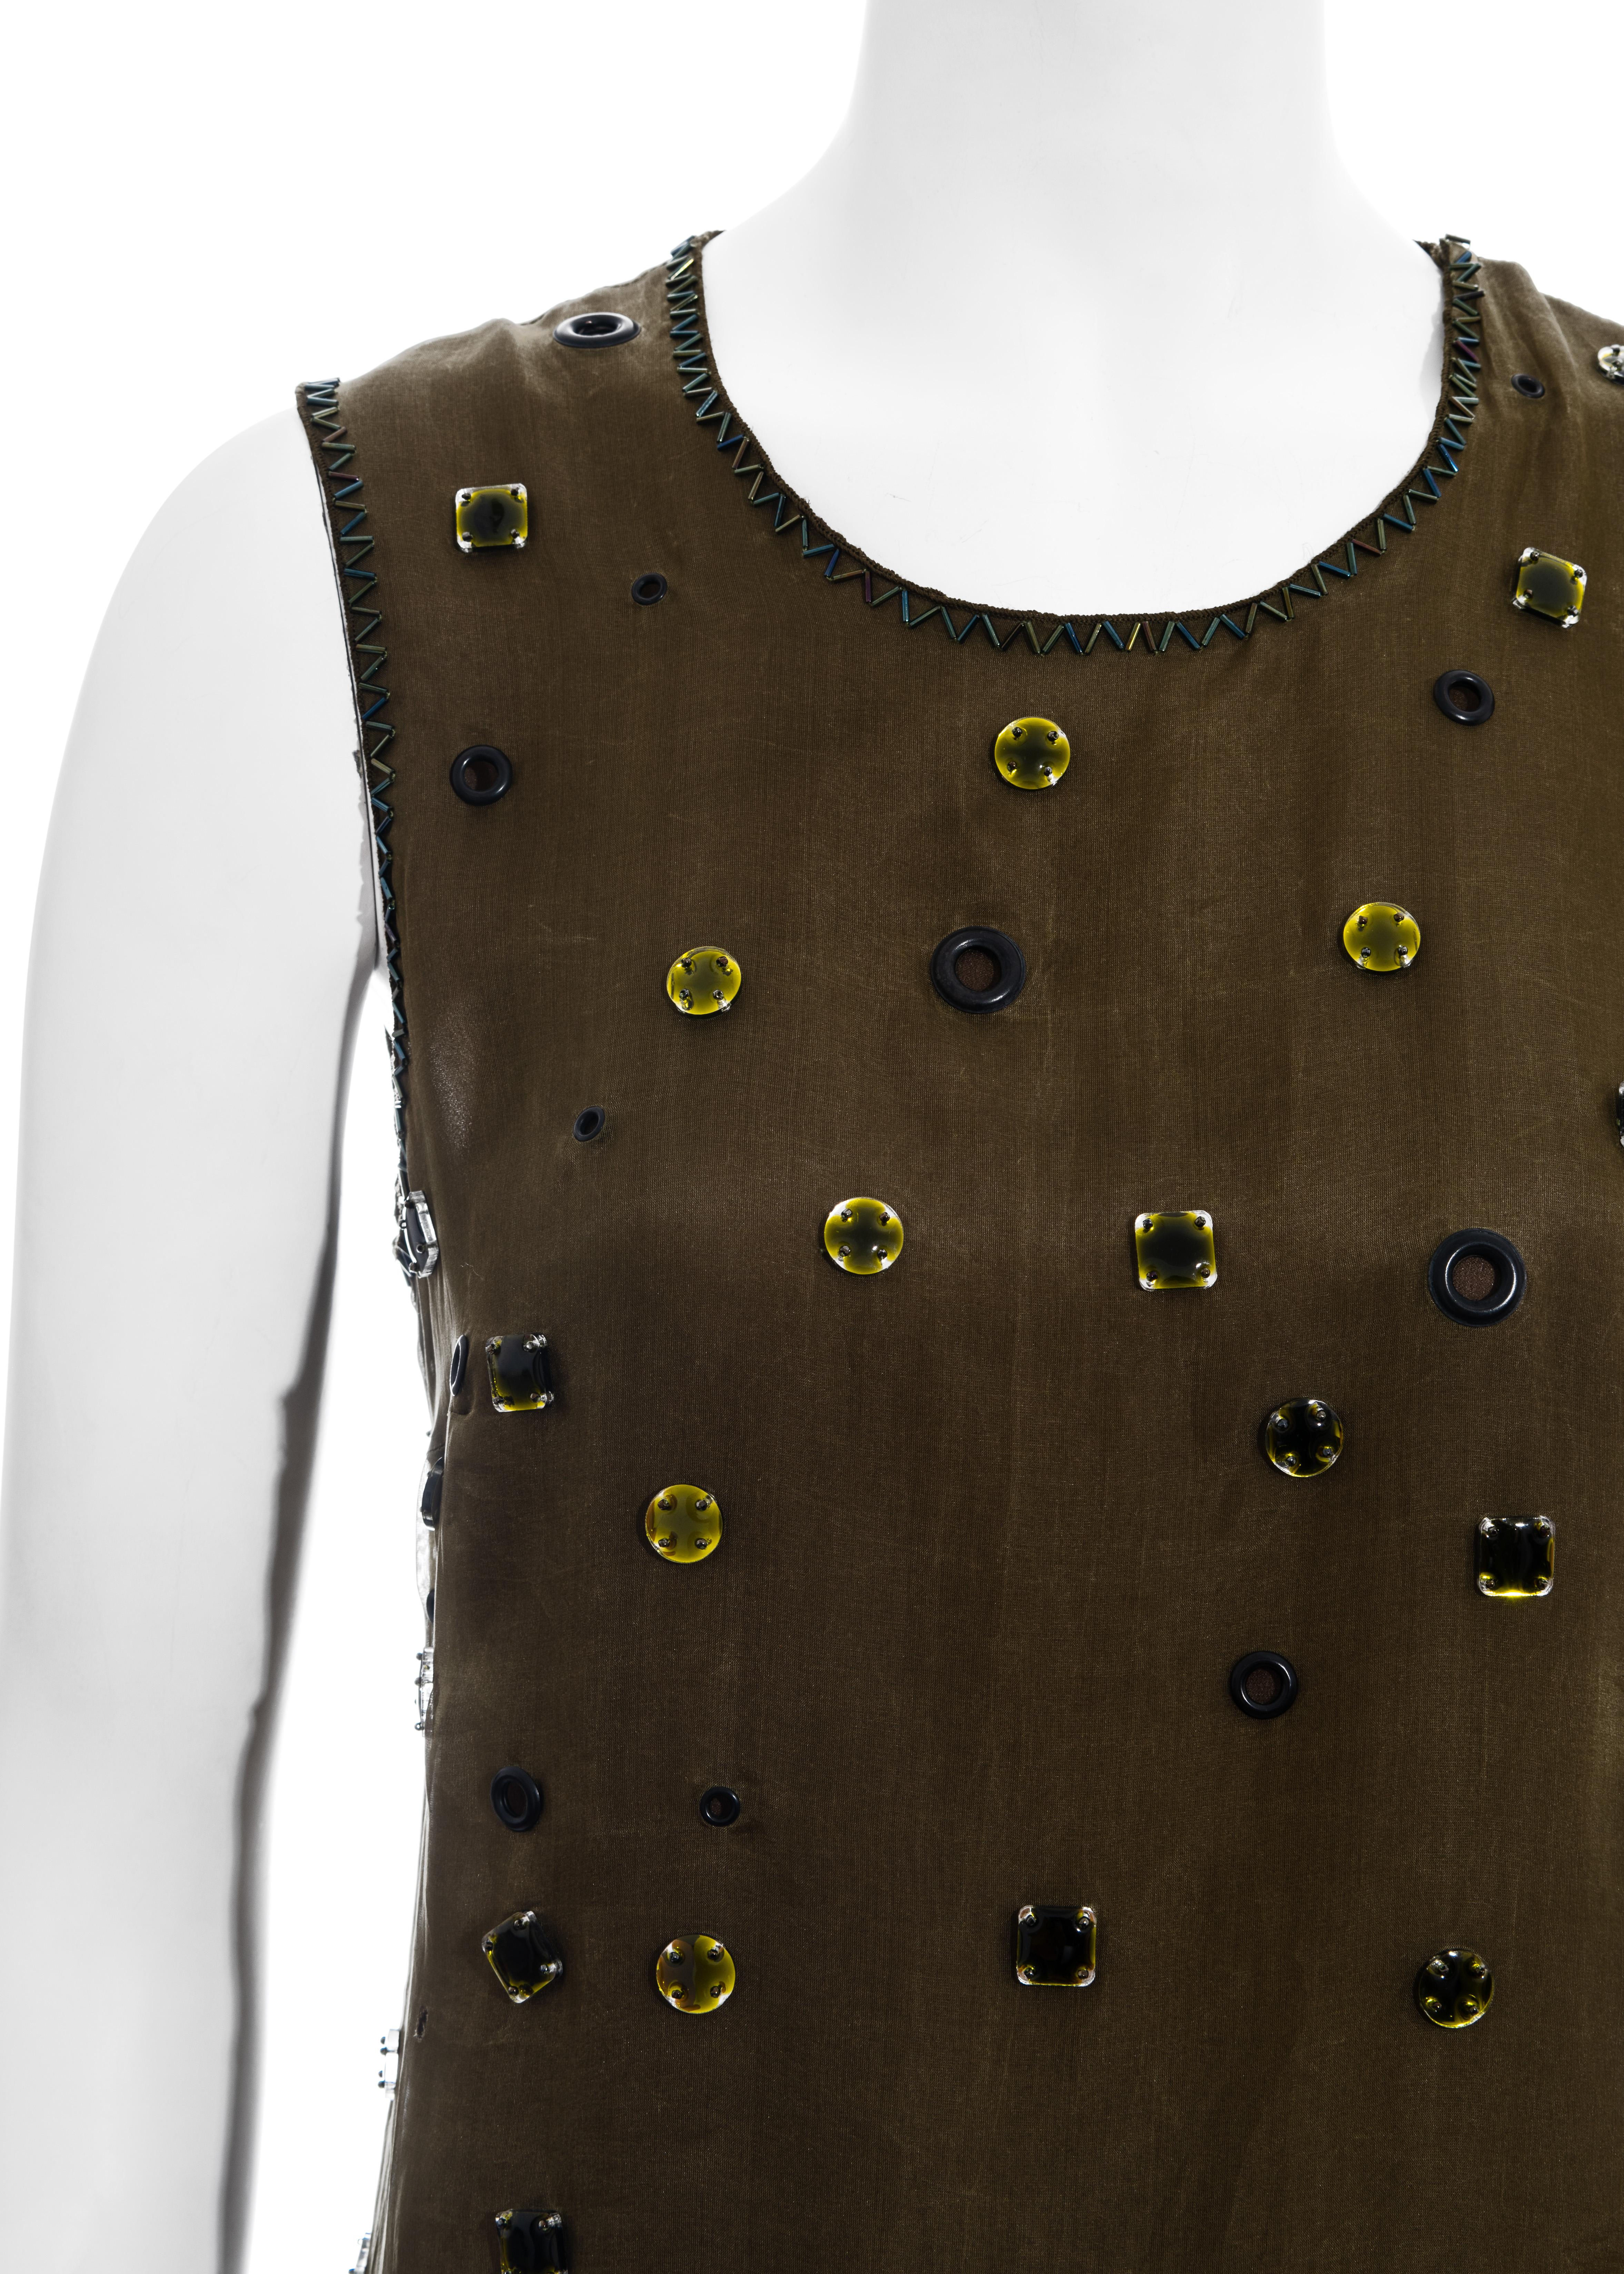 Prada green silk organza embellished vest with open back, fw 1999 For Sale 1